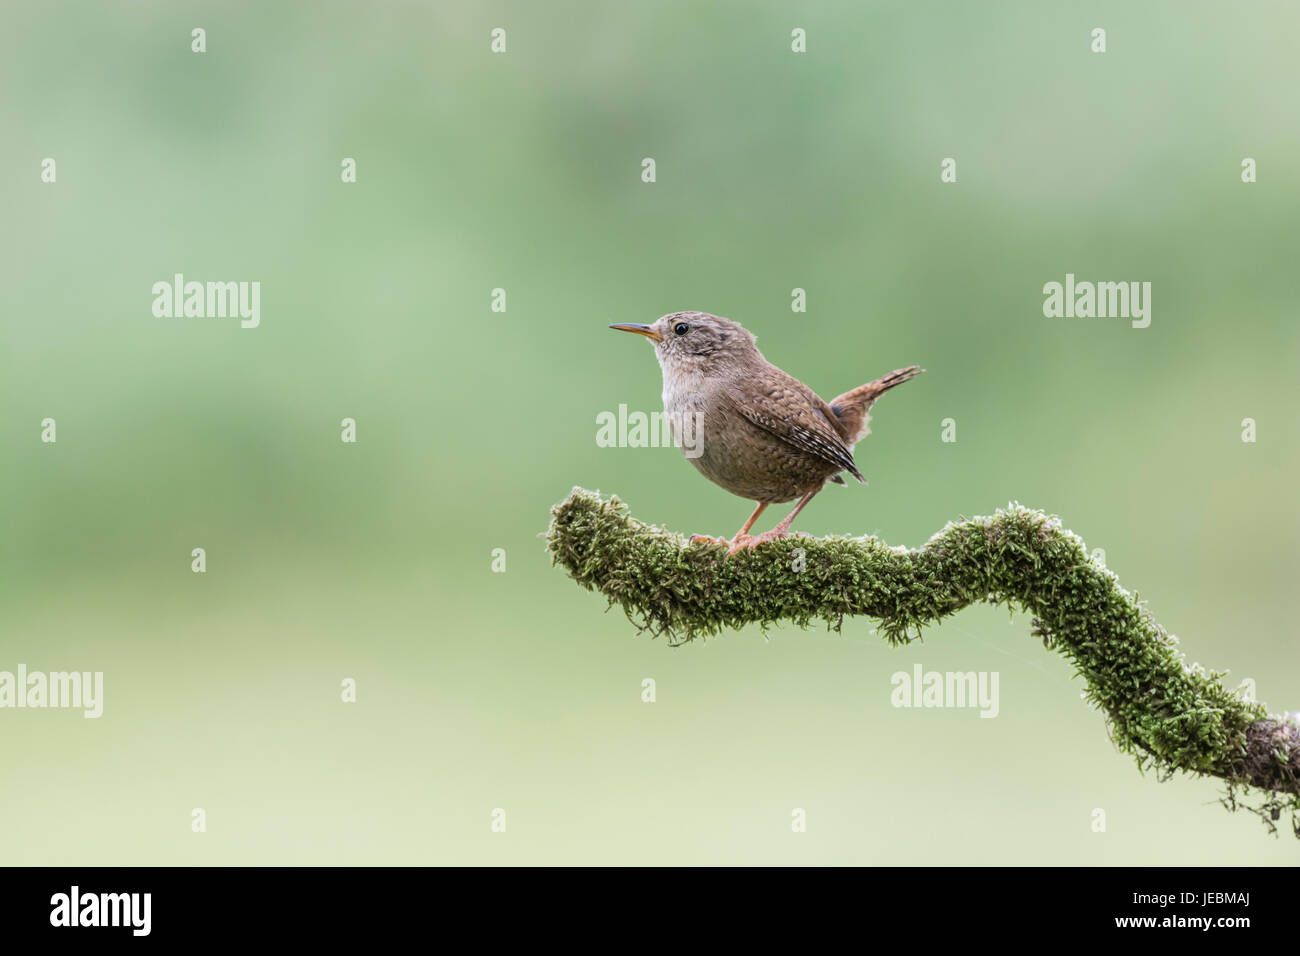 Wren (Troglodytes troglodytes) on an isolated branch. The species is called the winter wren in America, and the common or Holarctic wren elsewhere. Stock Photo